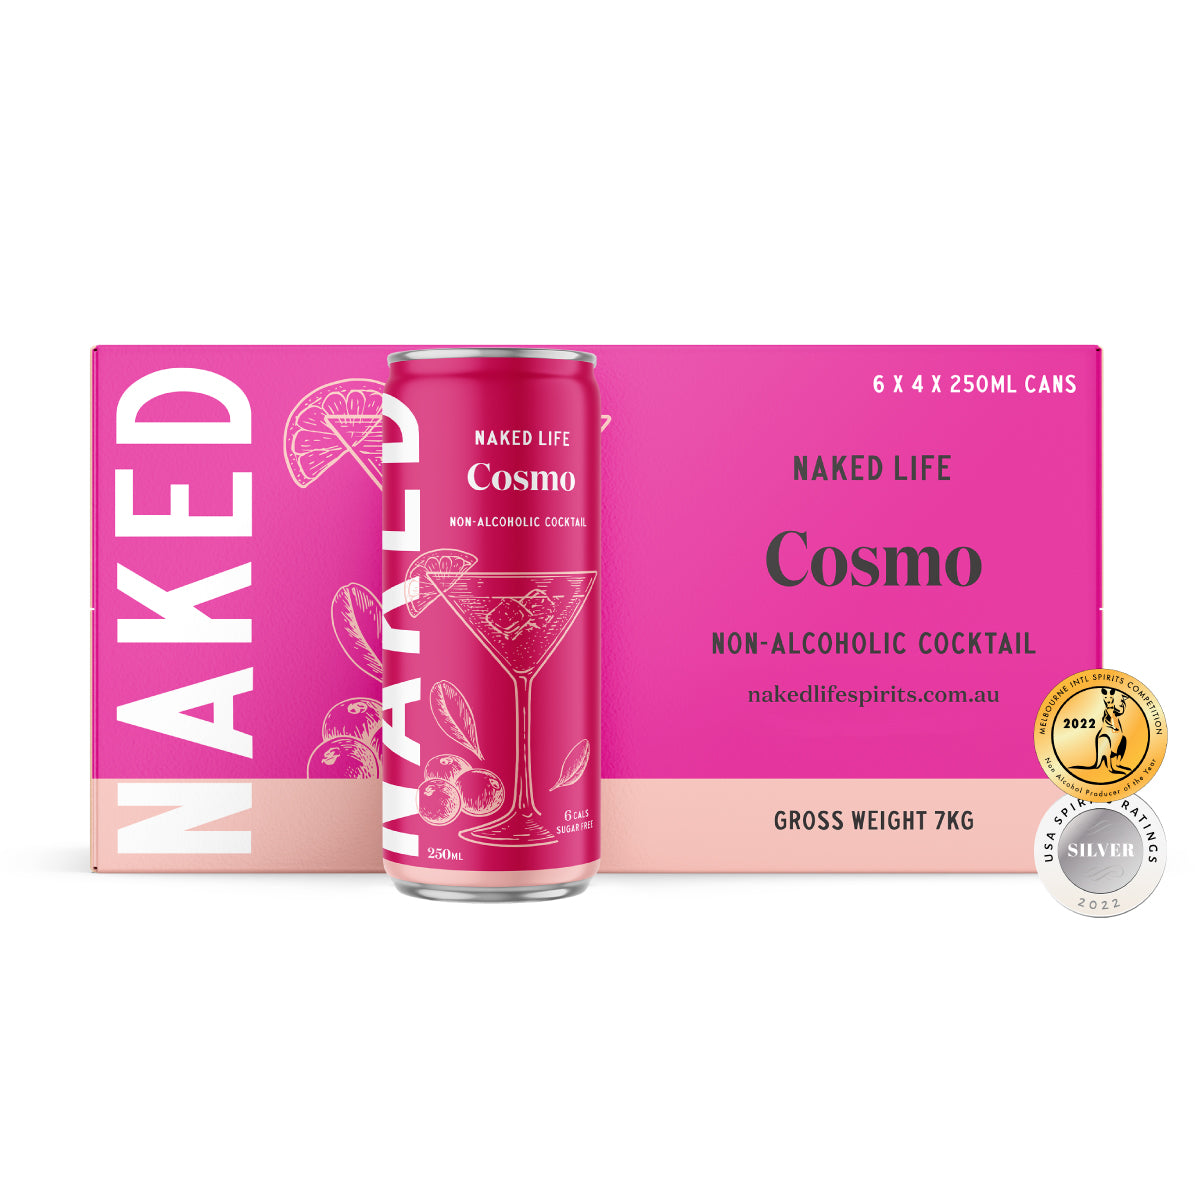 Naked Life Non-Alcoholic Cocktail Cosmo - 6 x 4 x 250ml Cans